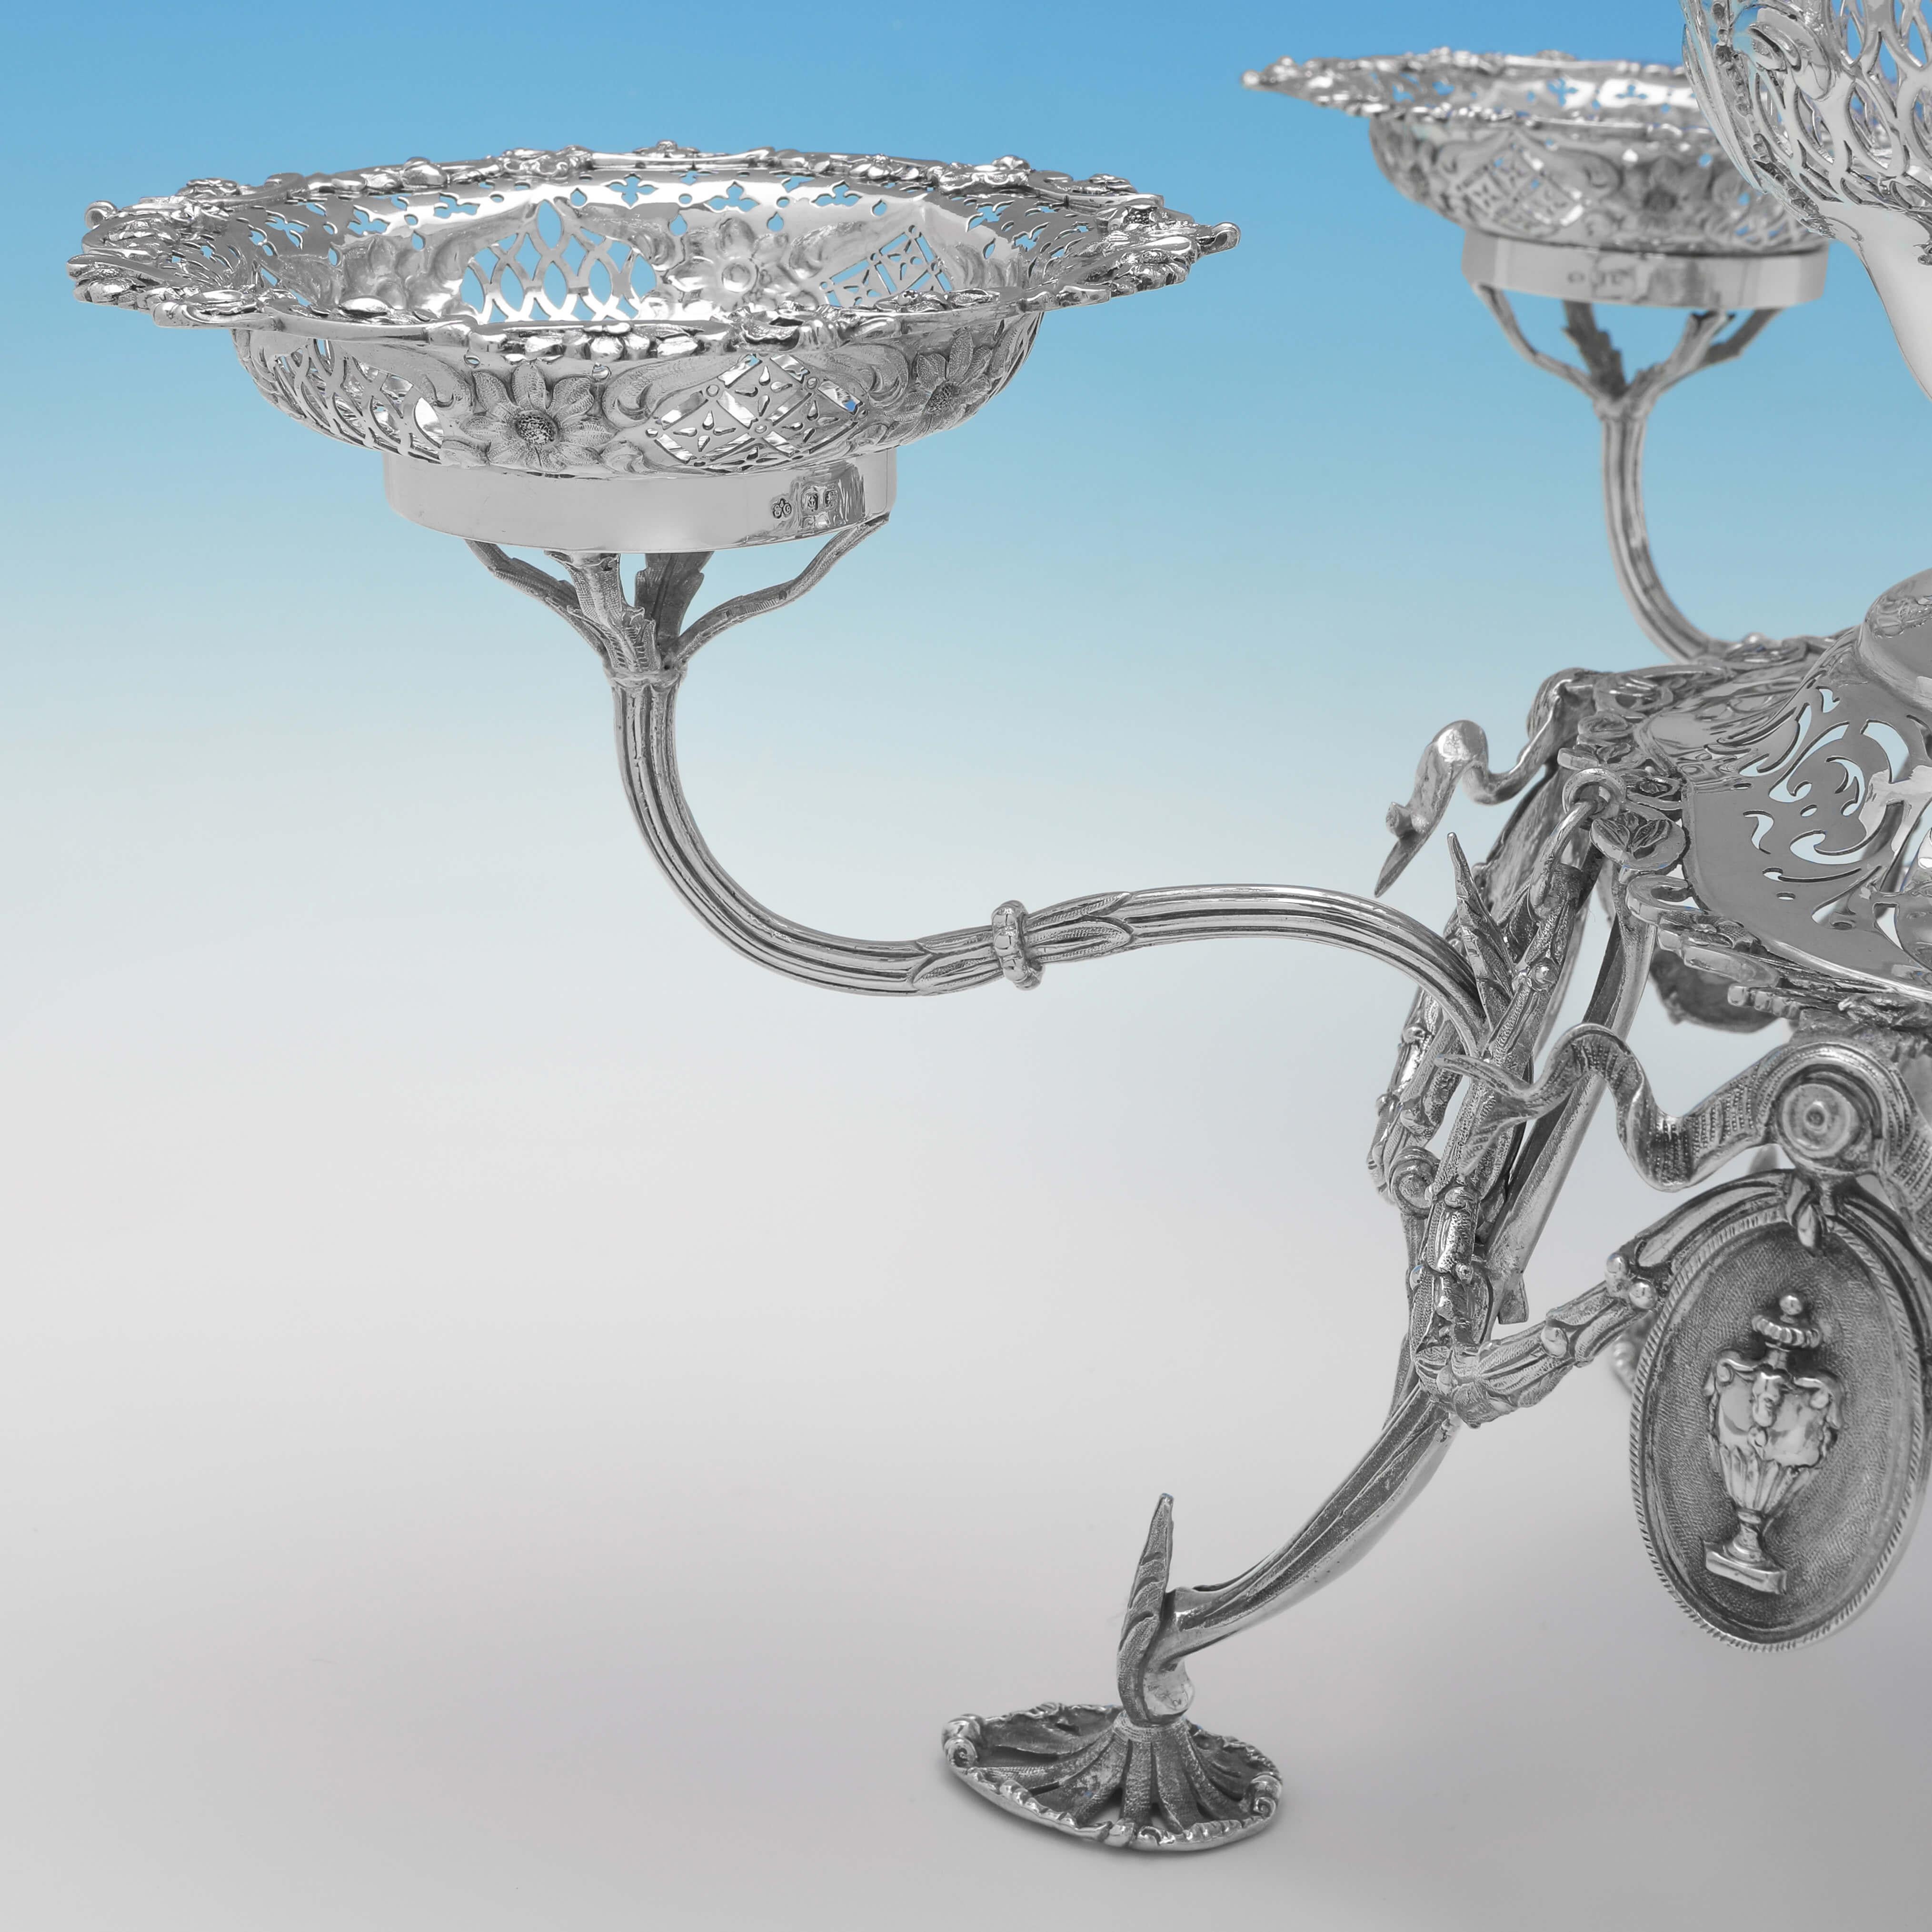 Early 20th Century Neoclassical Revival Antique Edwardian Sterling Silver Centrepiece Epergne, 1910 For Sale